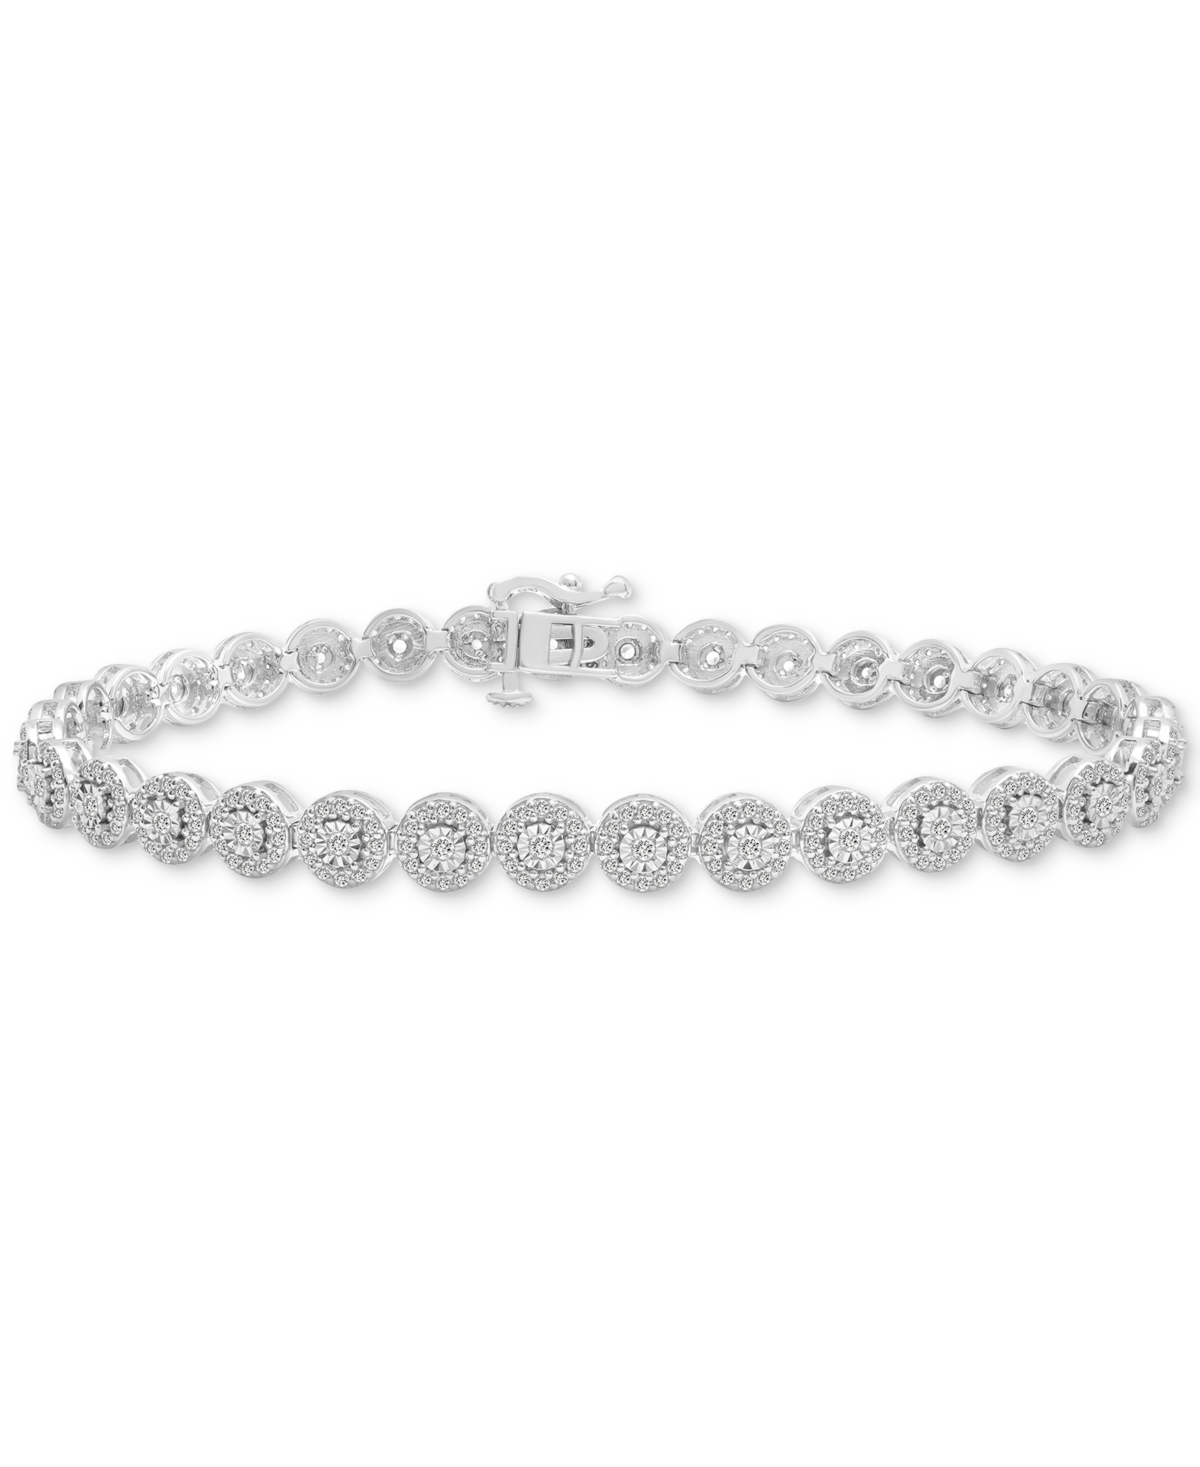 Diamond Tennis Bracelet (2 ct. t.w.) in Sterling Silver, Created for Macy's - Sterling Silver